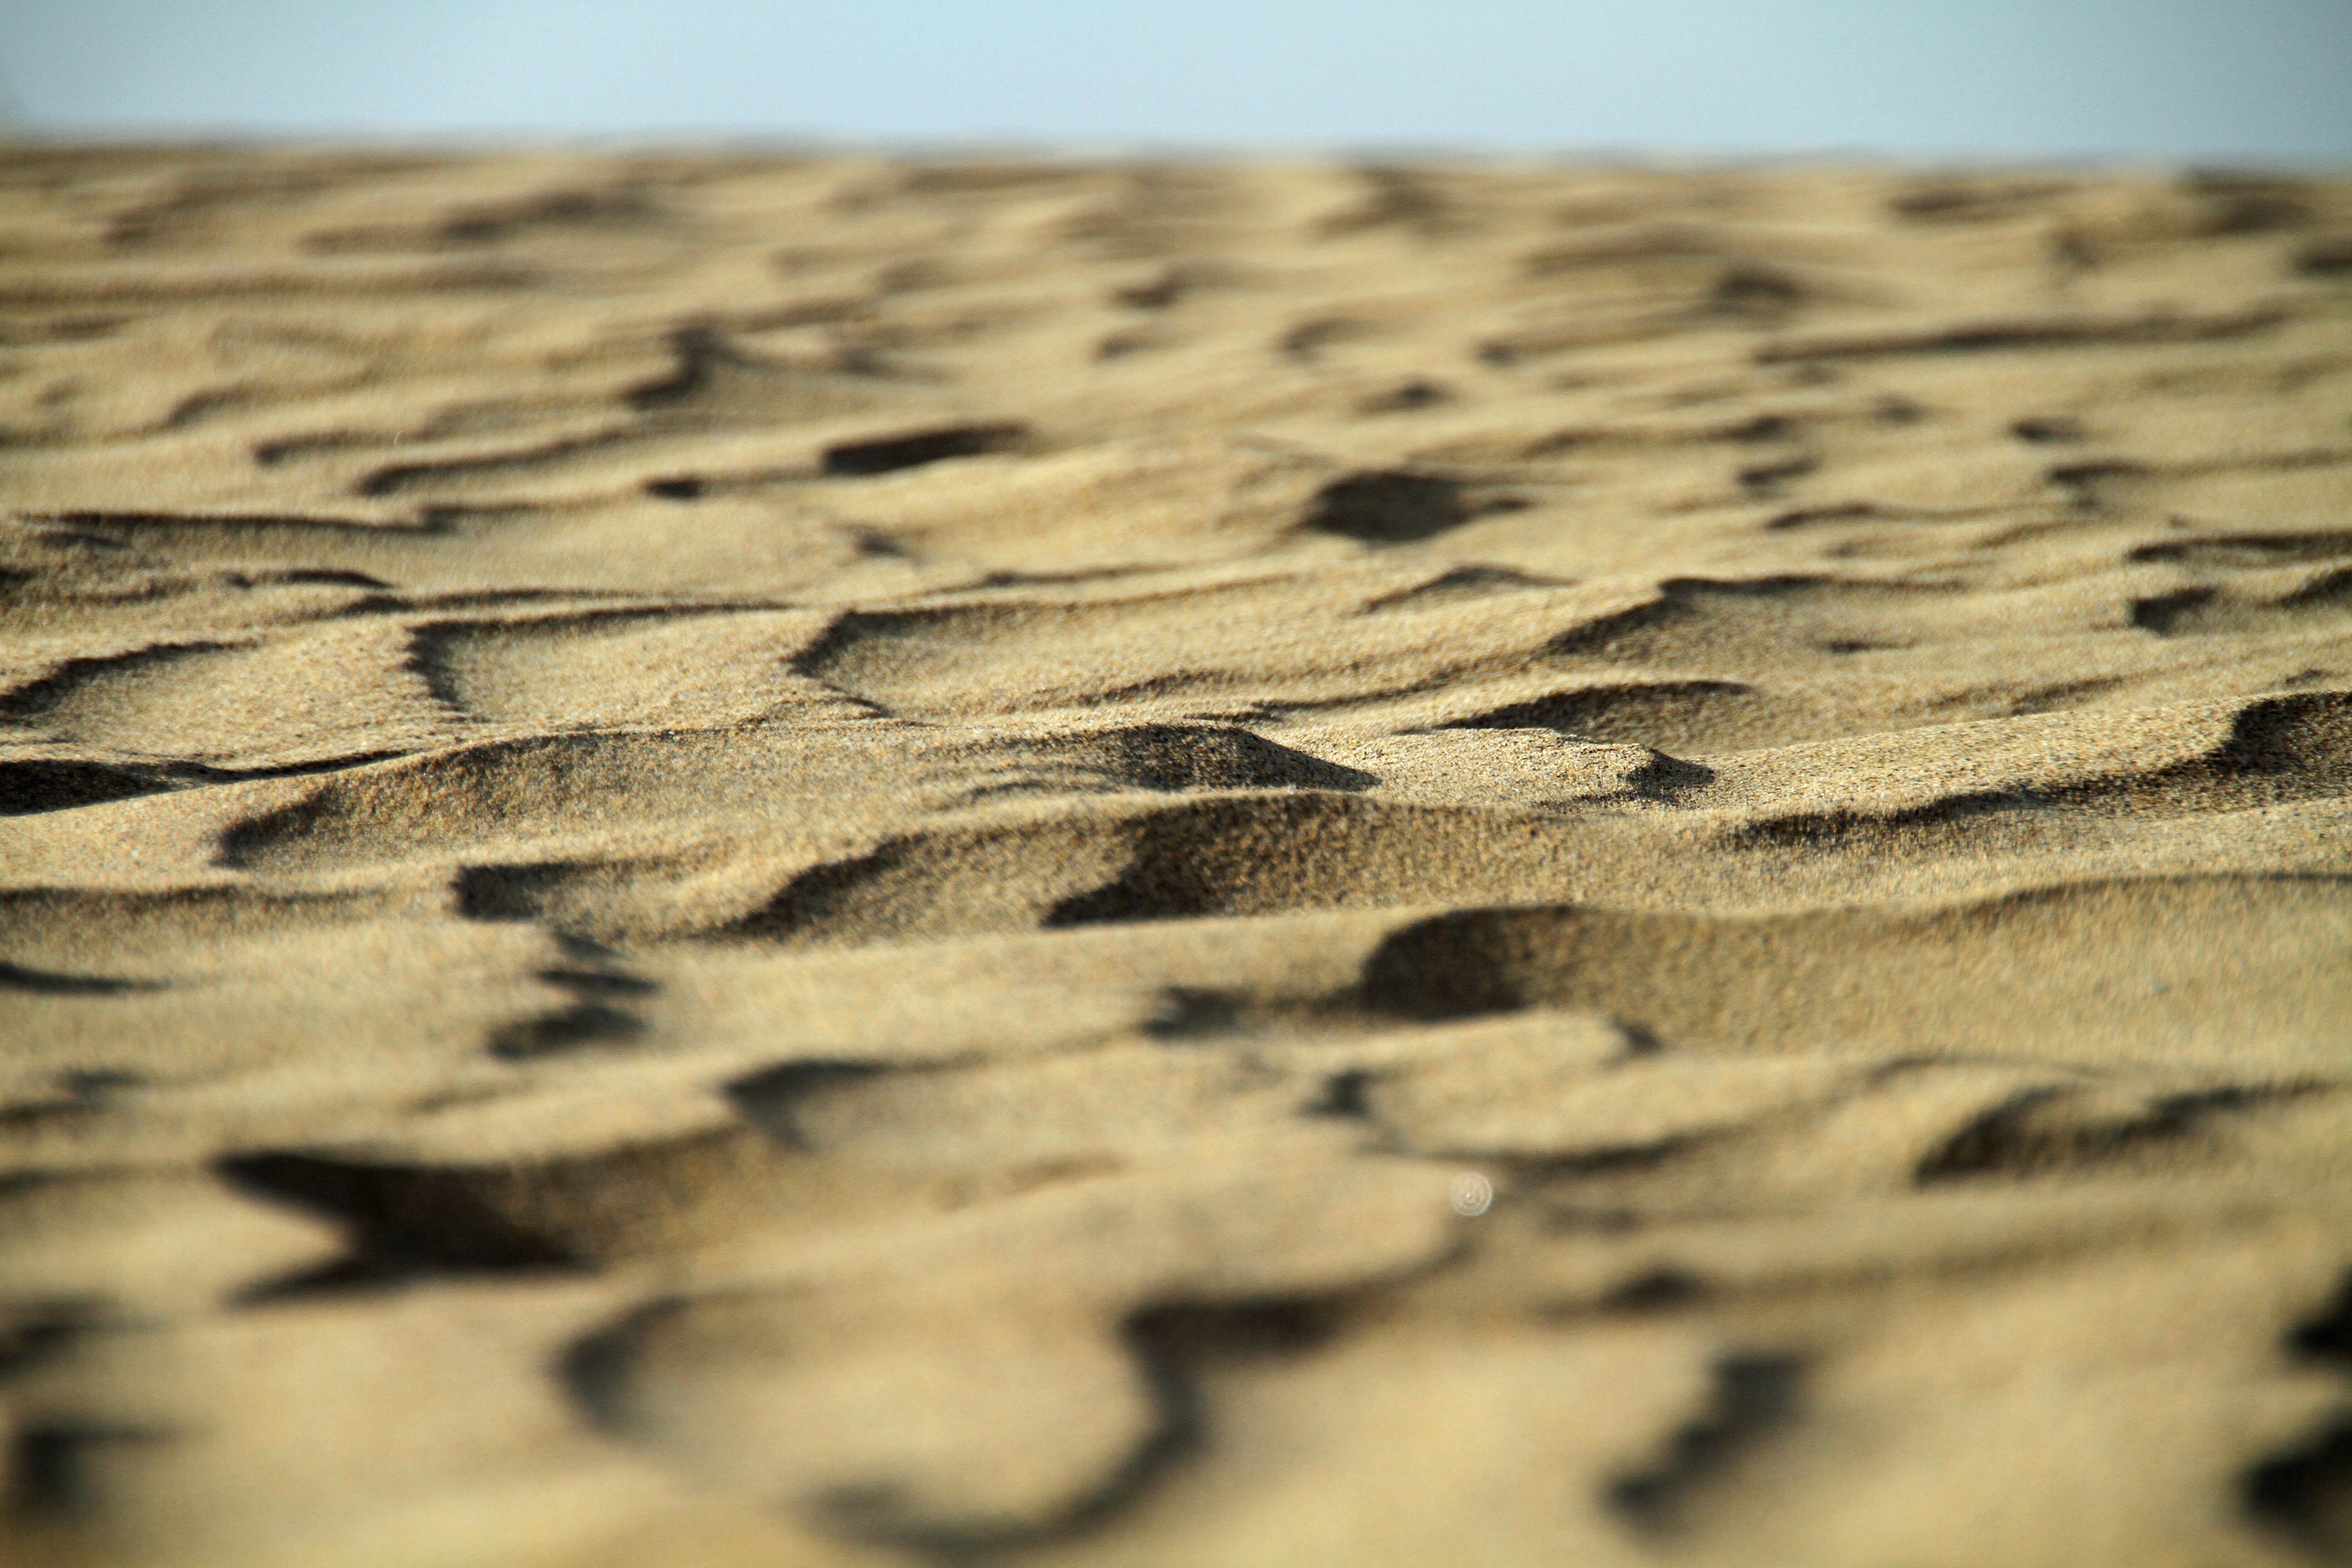 Canary Islands, Dunes, Gran Canaria, pattern, sand